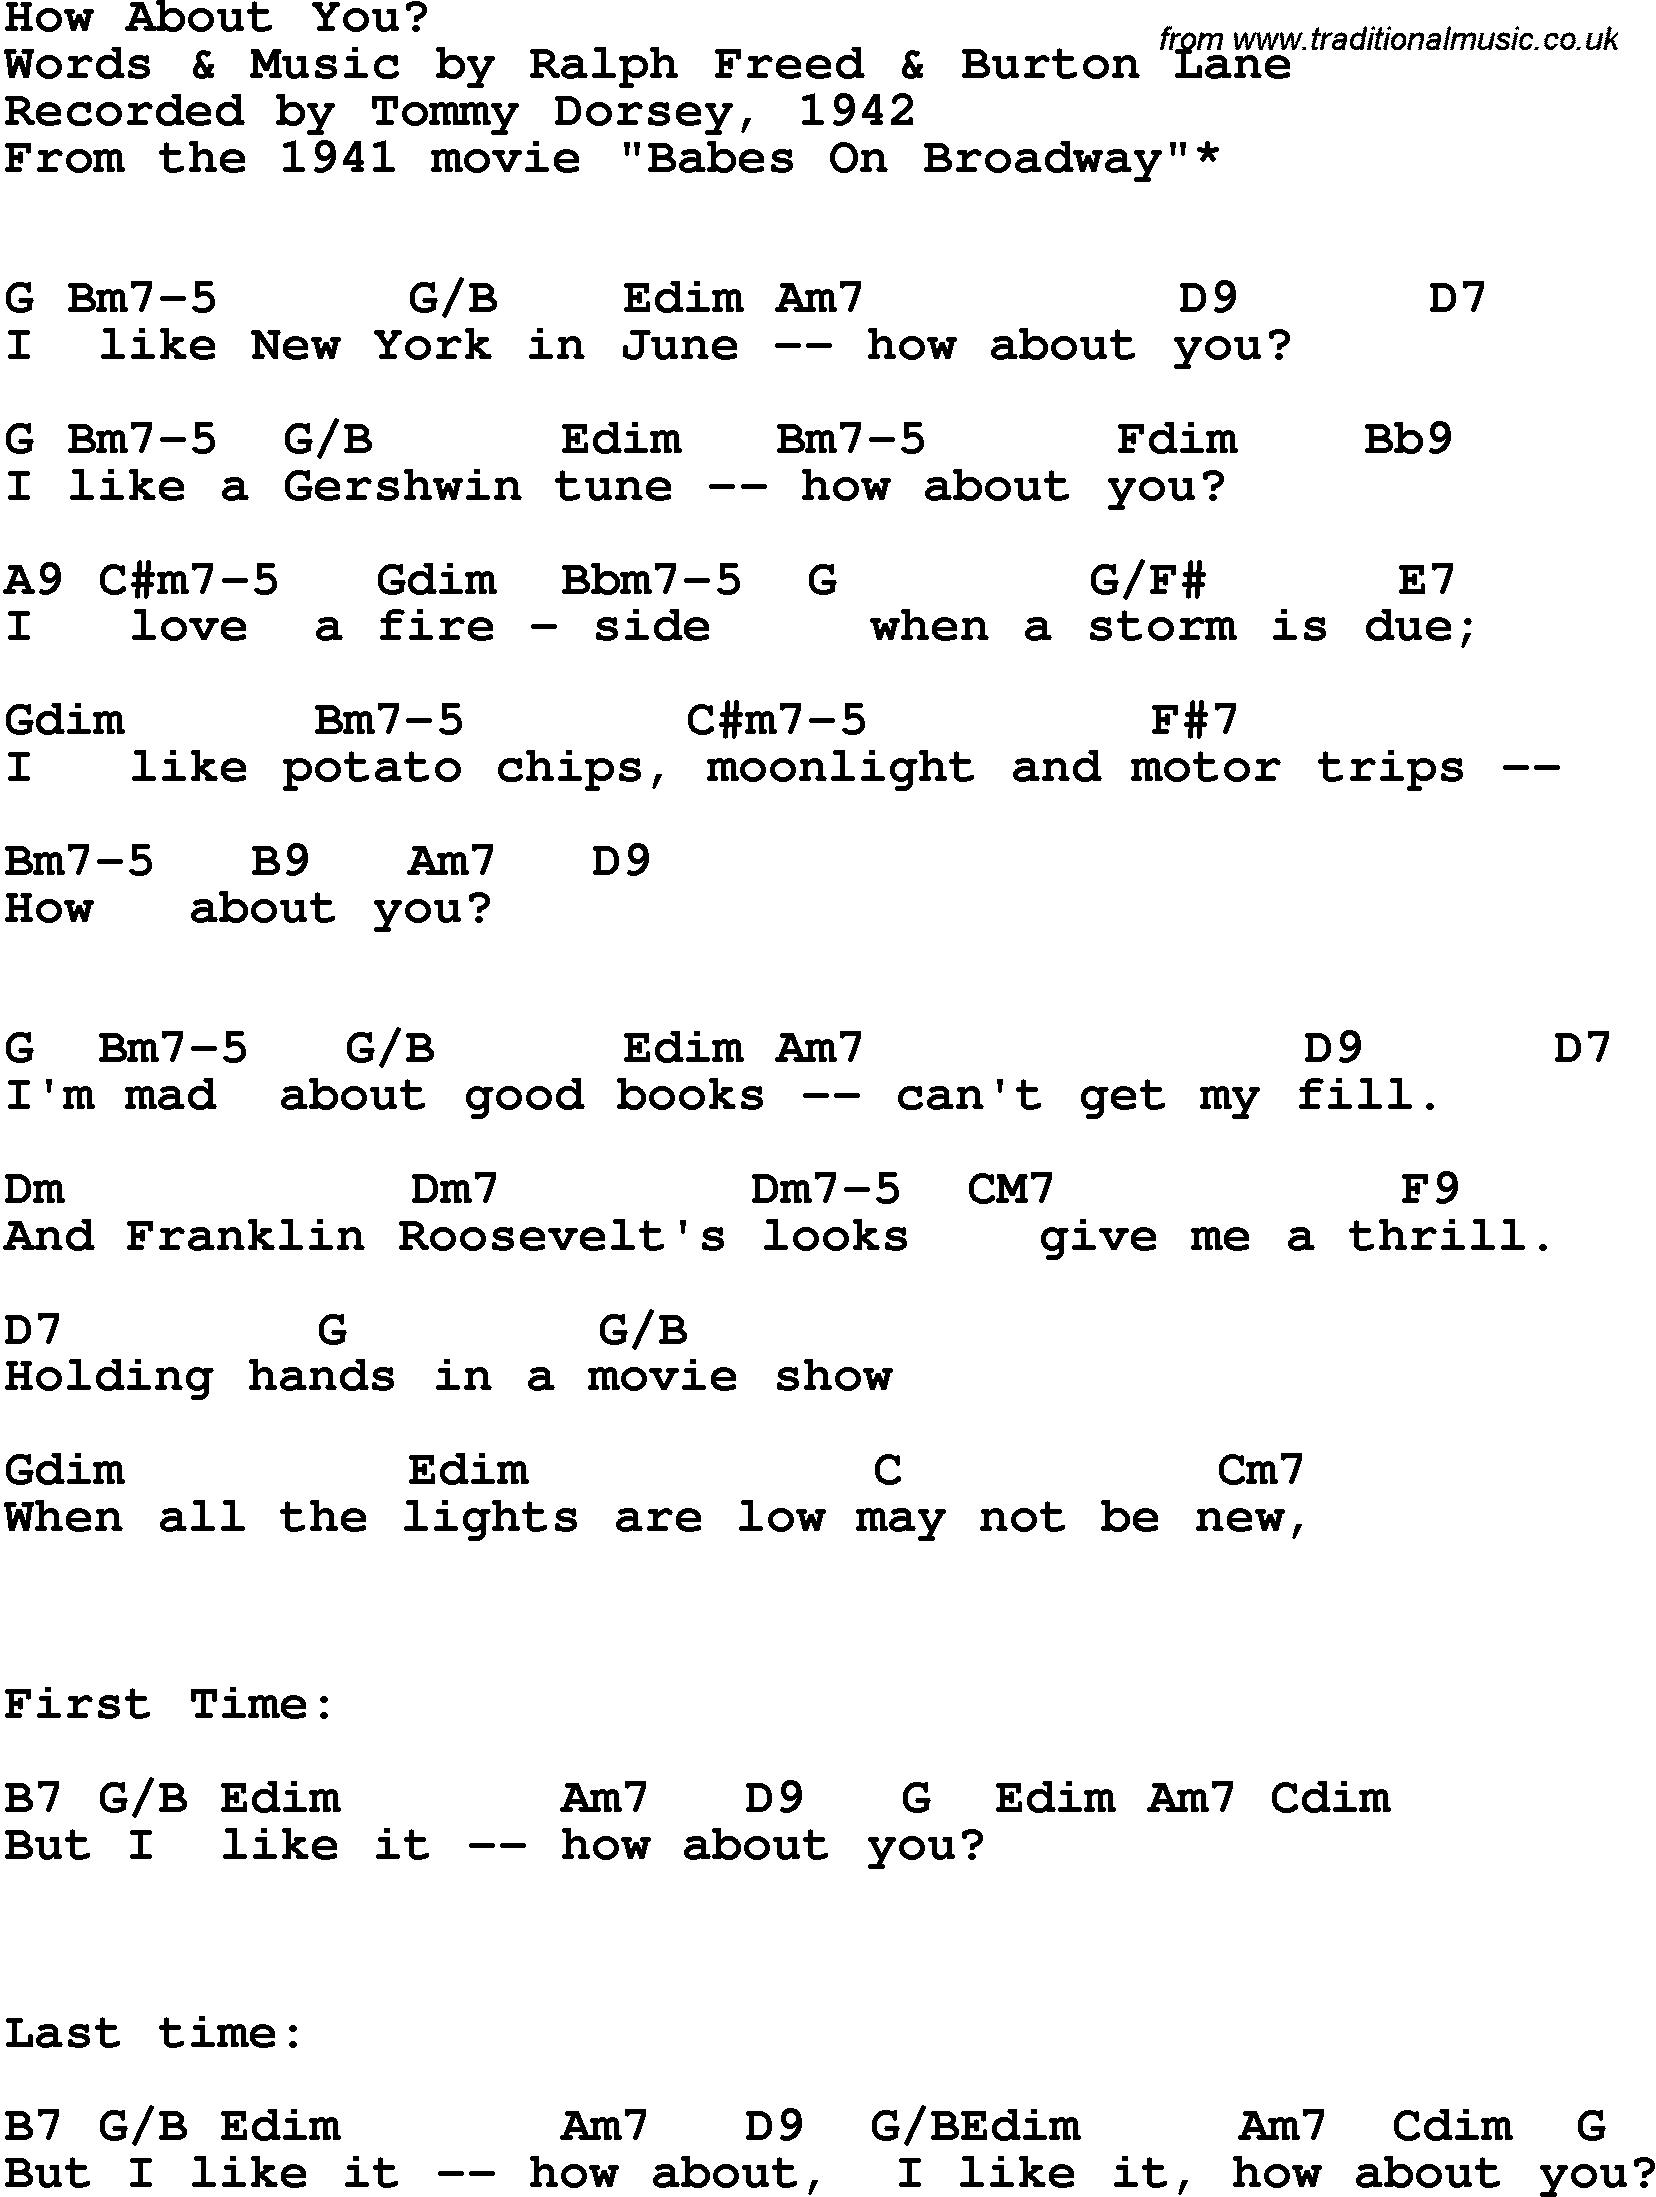 Song Lyrics with guitar chords for How About You - Tommy Dorsey, 1942